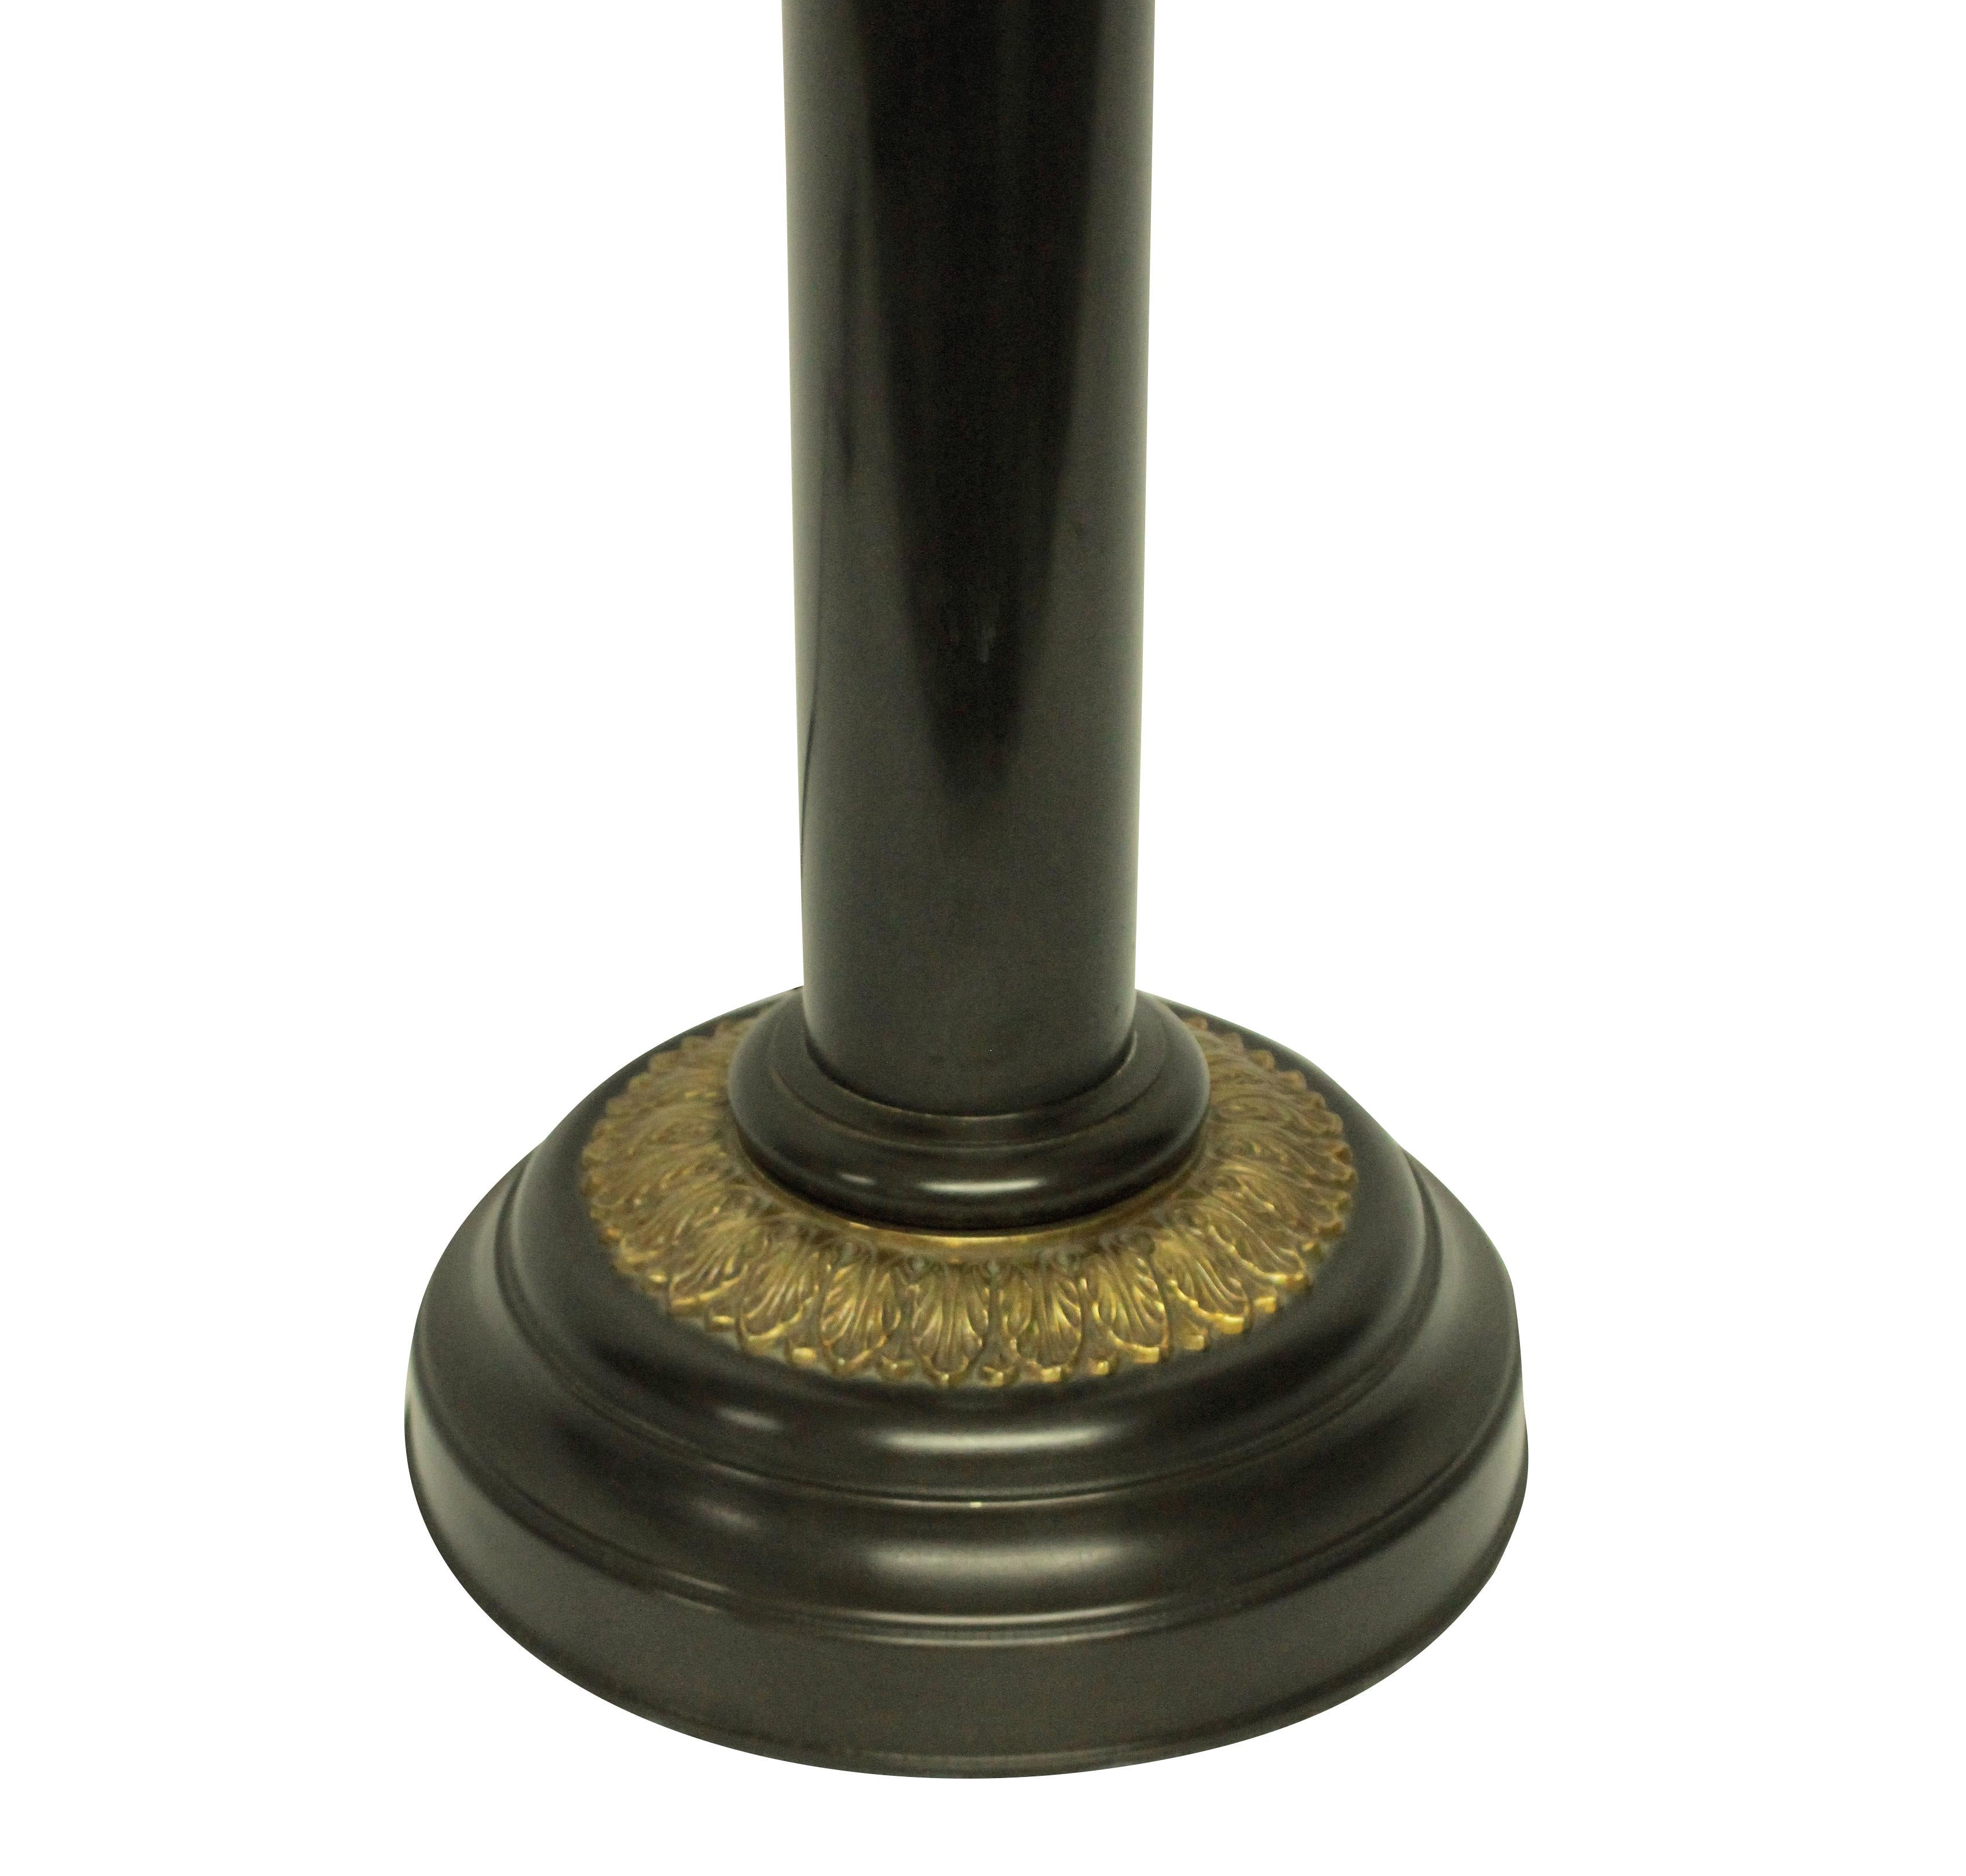 A large English bronze and ormolu column lamp in the Regency manner, made for 10 downing street, where several of these lamps can be found.